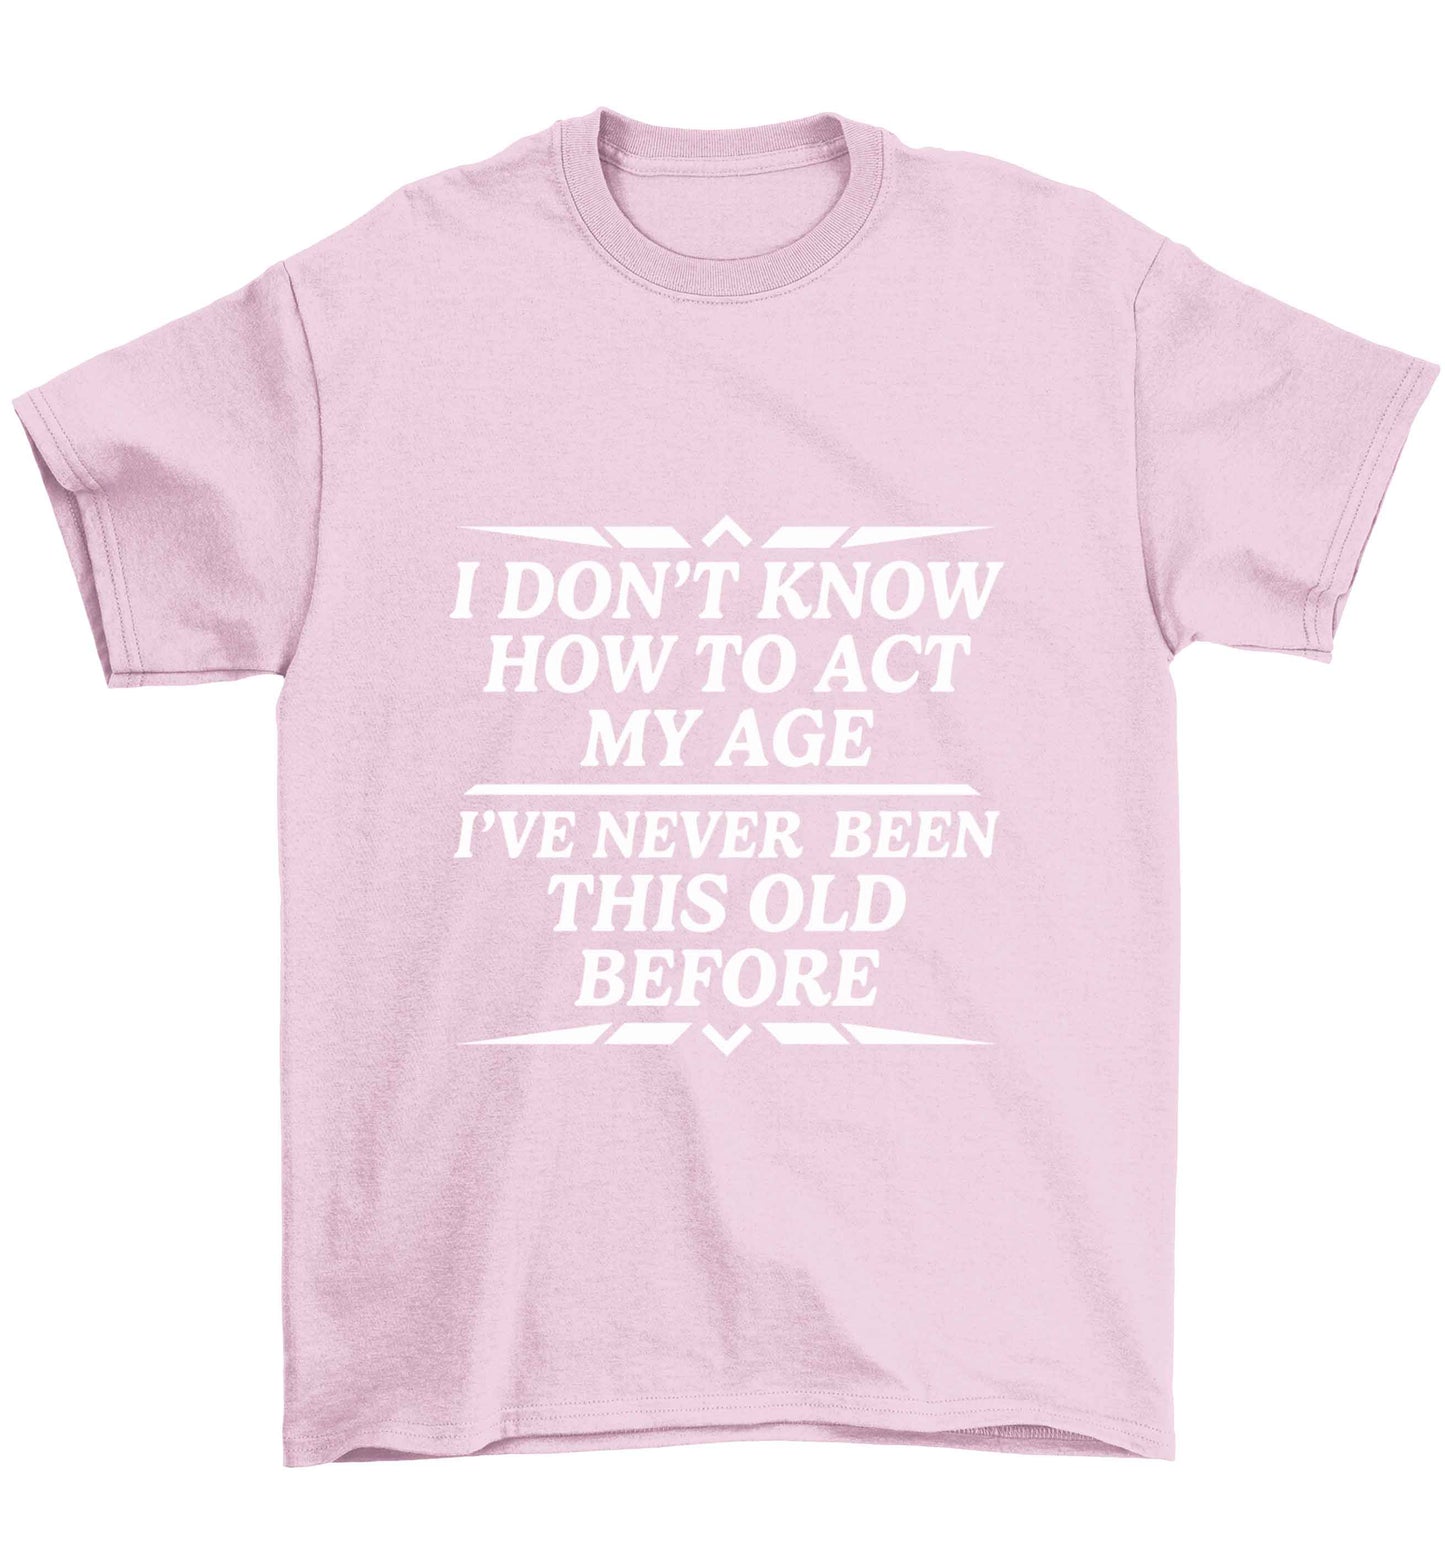 I don't know how to act my age I've never been this old before Children's light pink Tshirt 12-13 Years